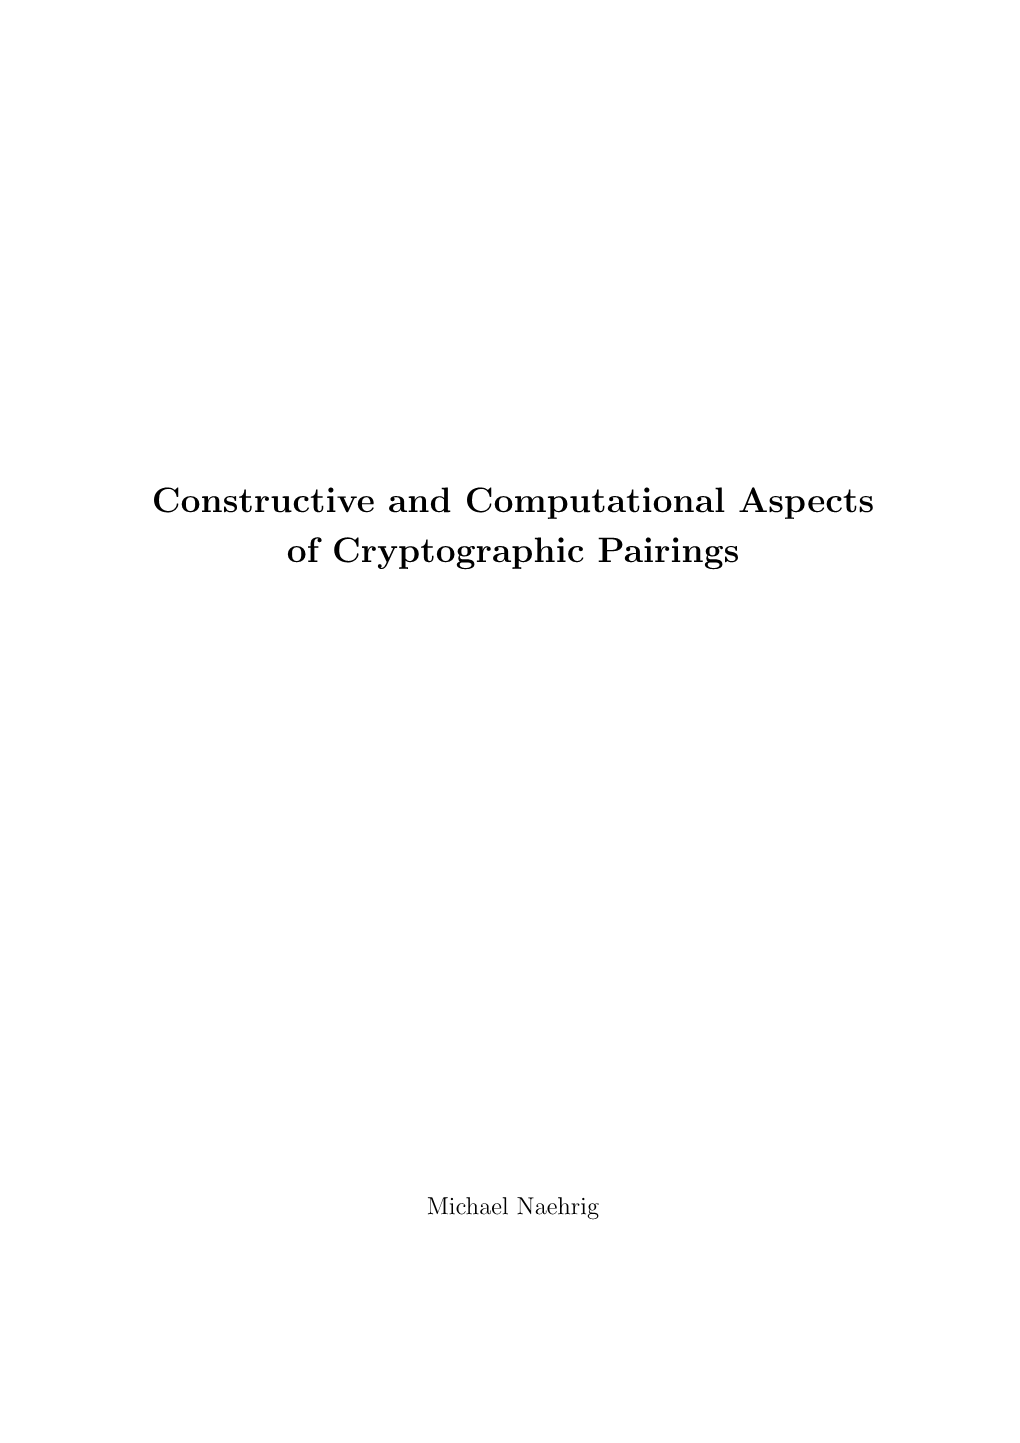 Constructive and Computational Aspects of Cryptographic Pairings